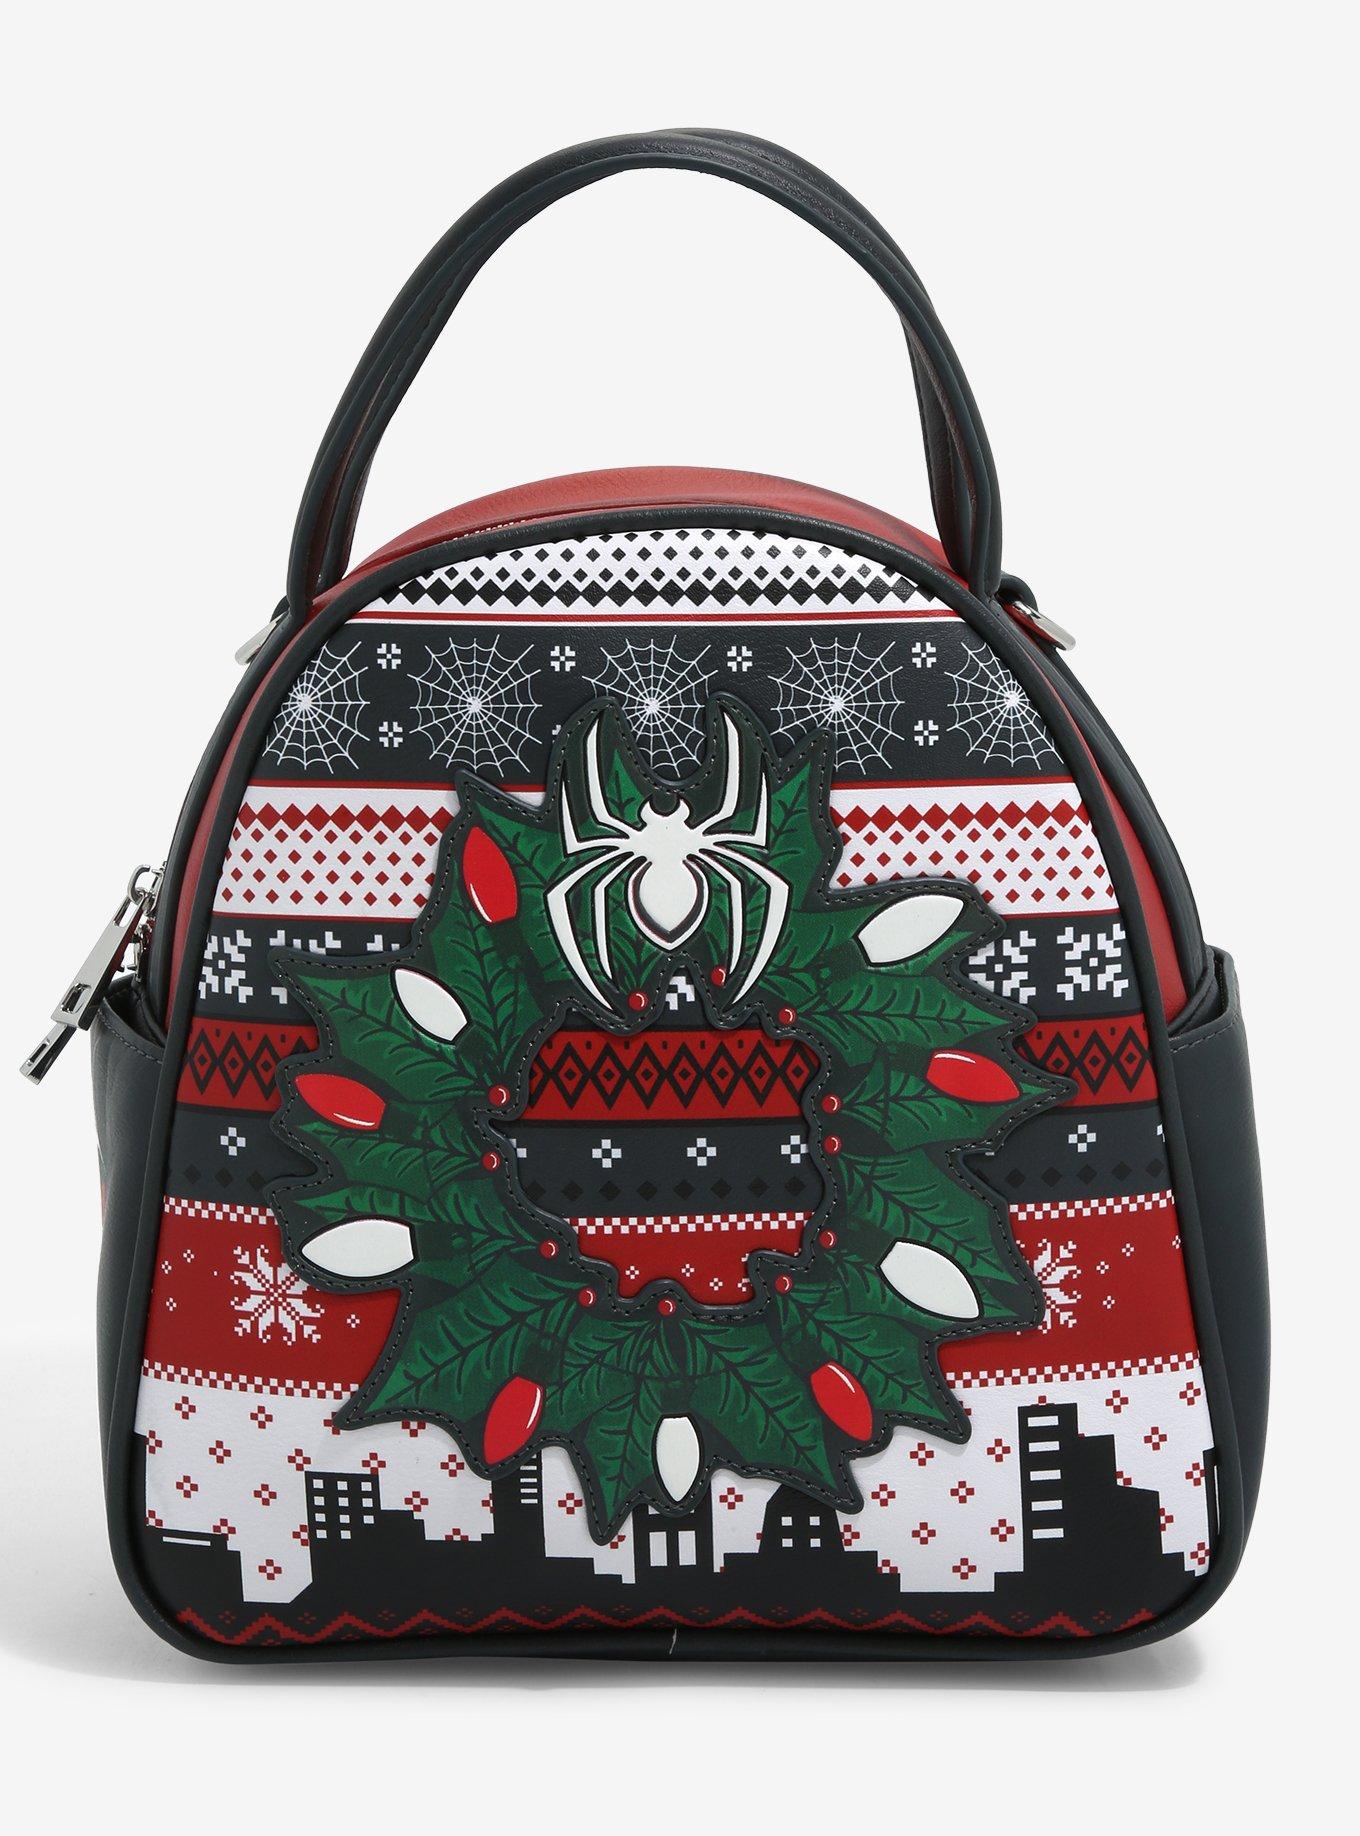 Spider-Man - Across The Spider-Verse 10 inch Faux Leather Mini Backpack